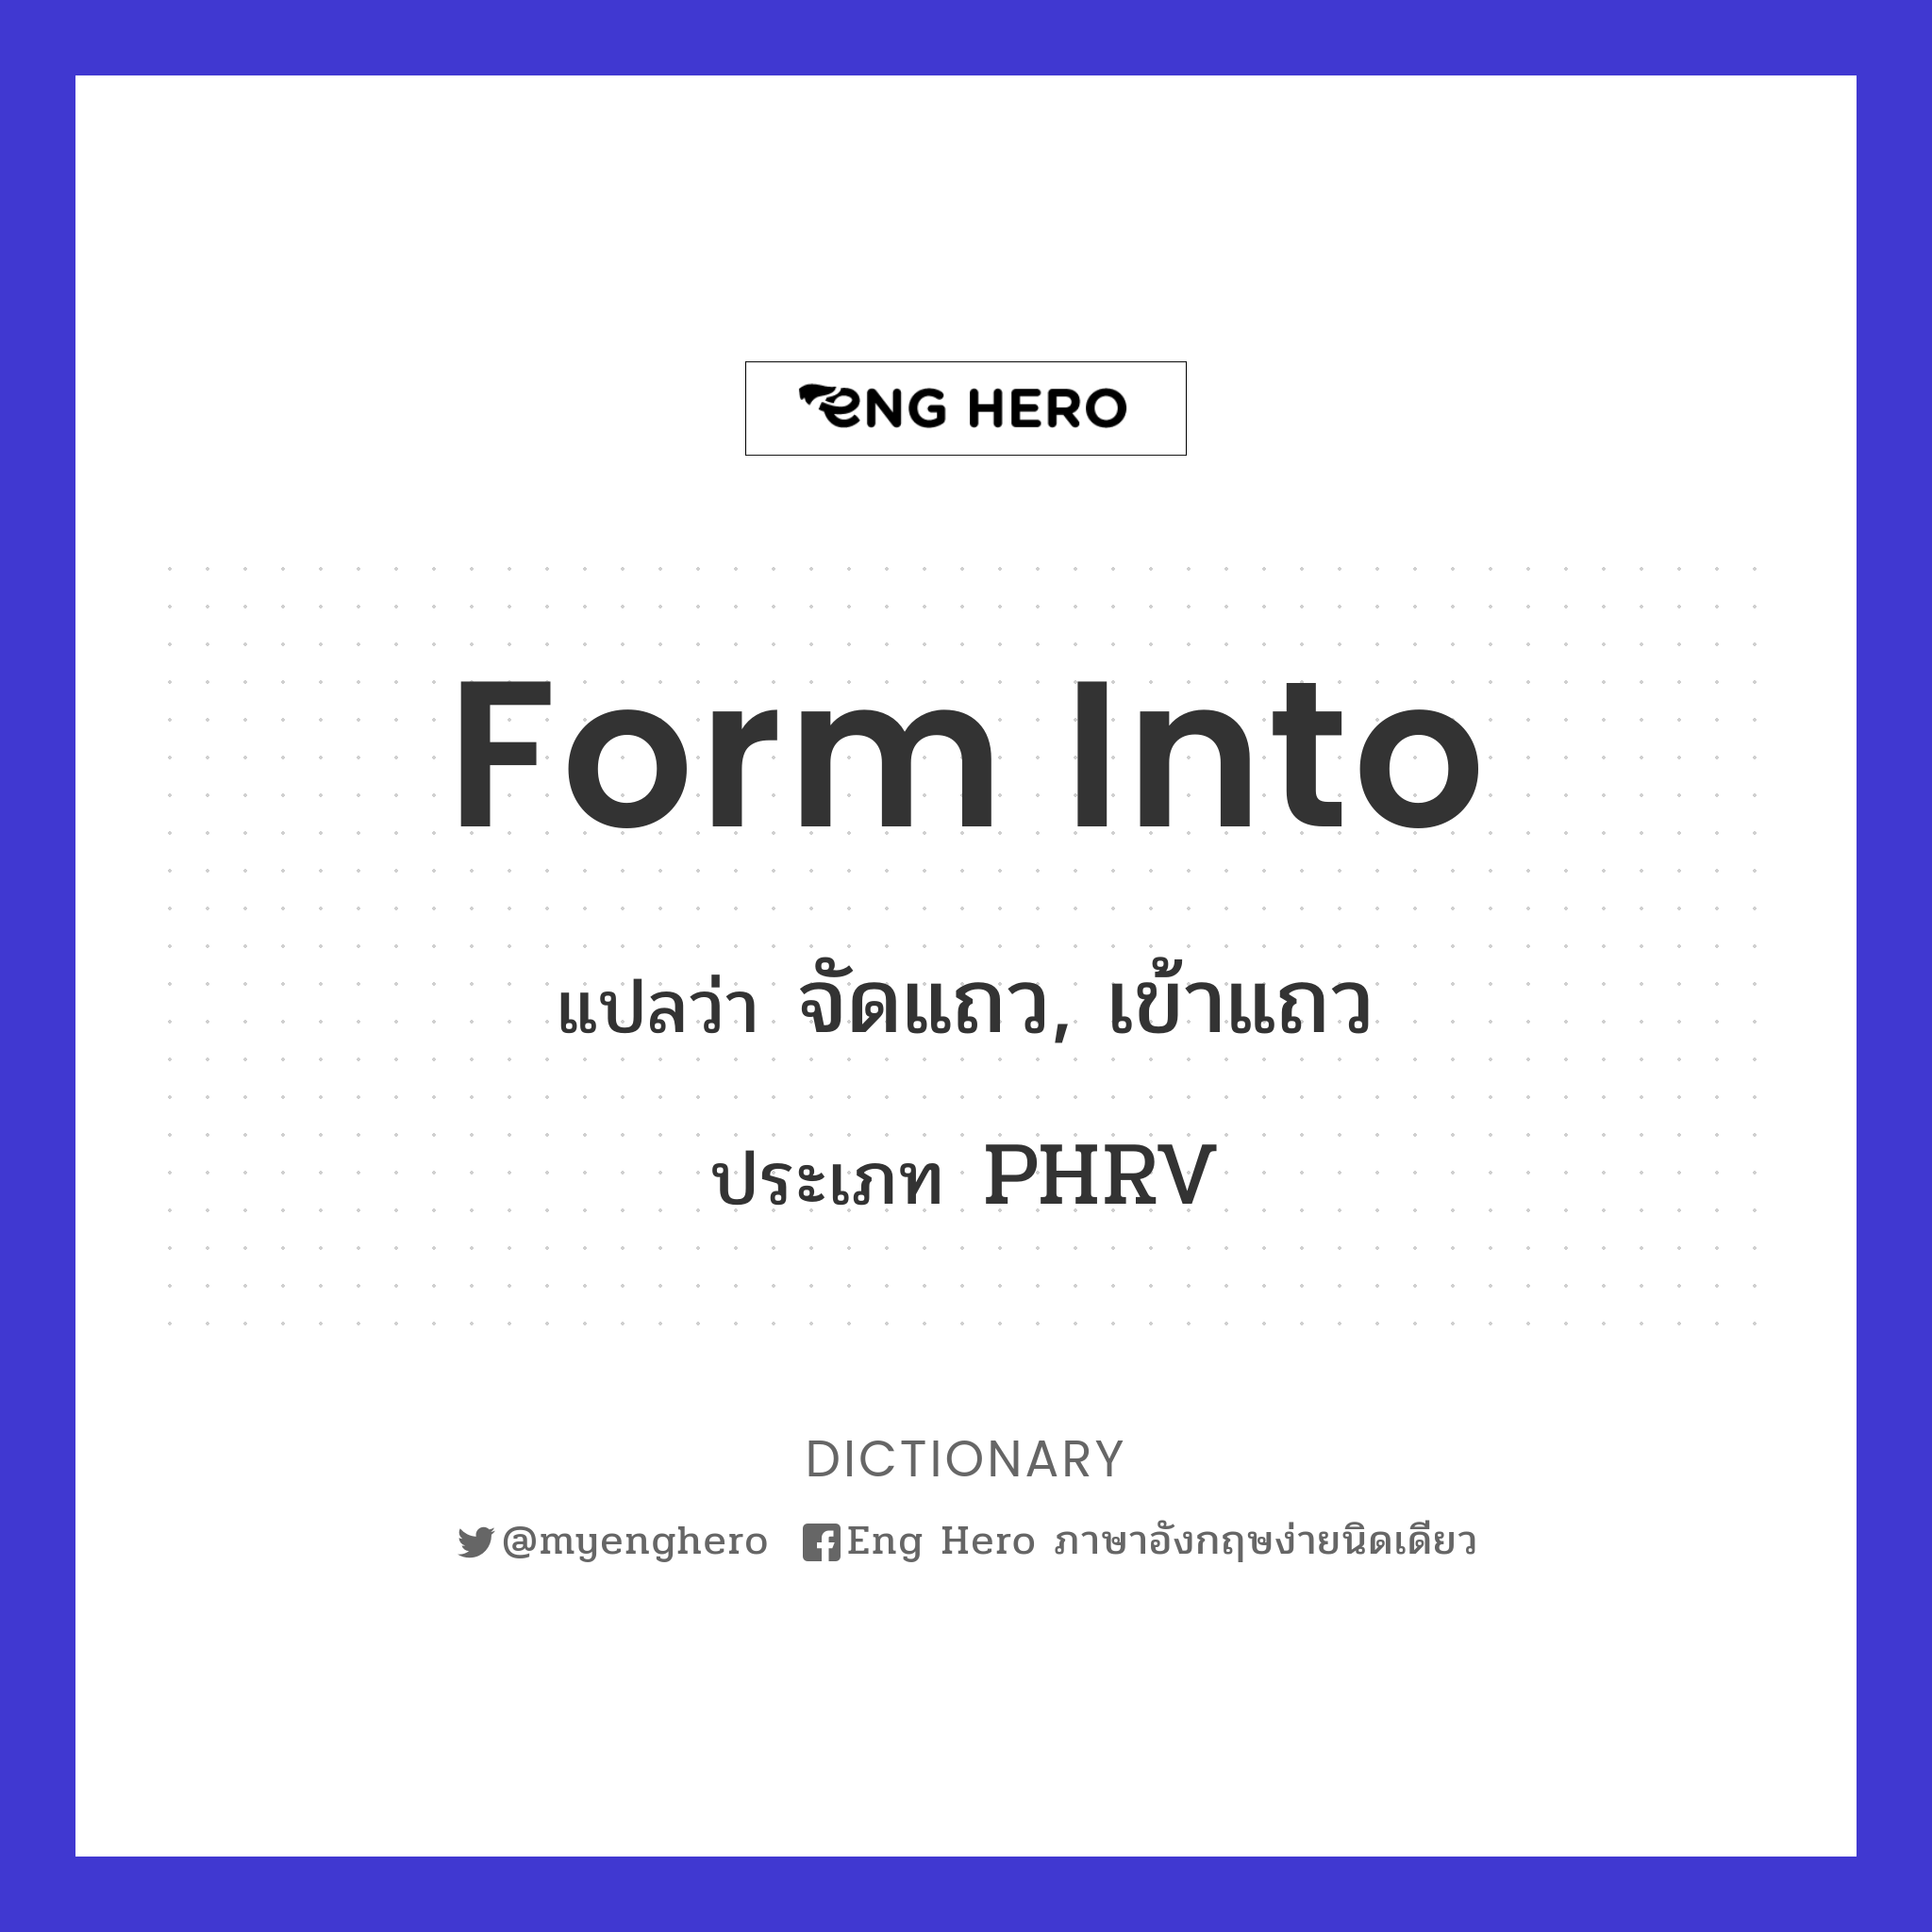 form into